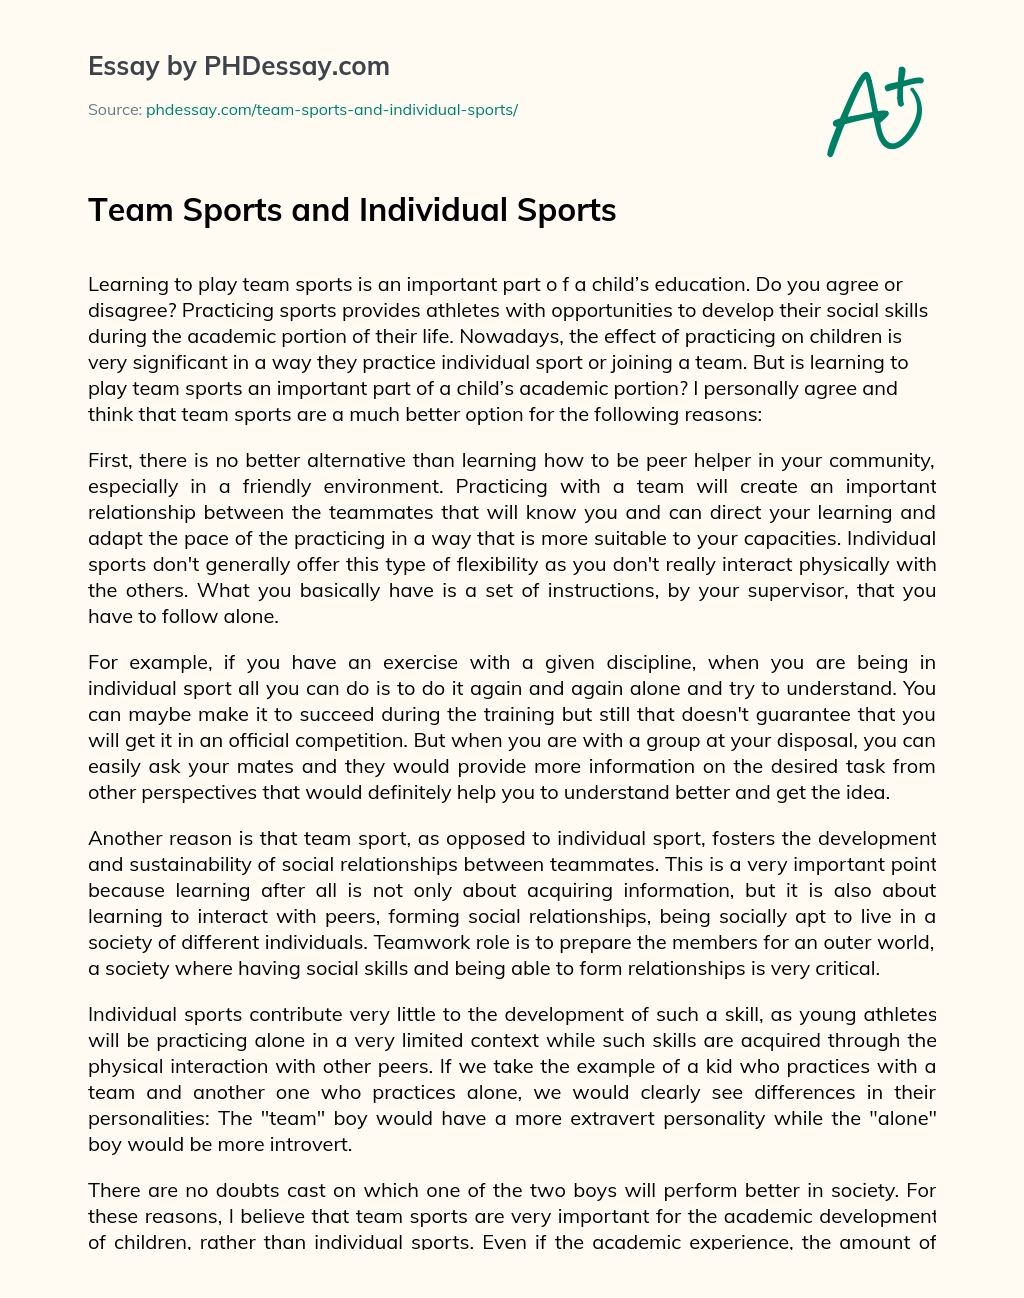 Team Sports and Individual Sports essay